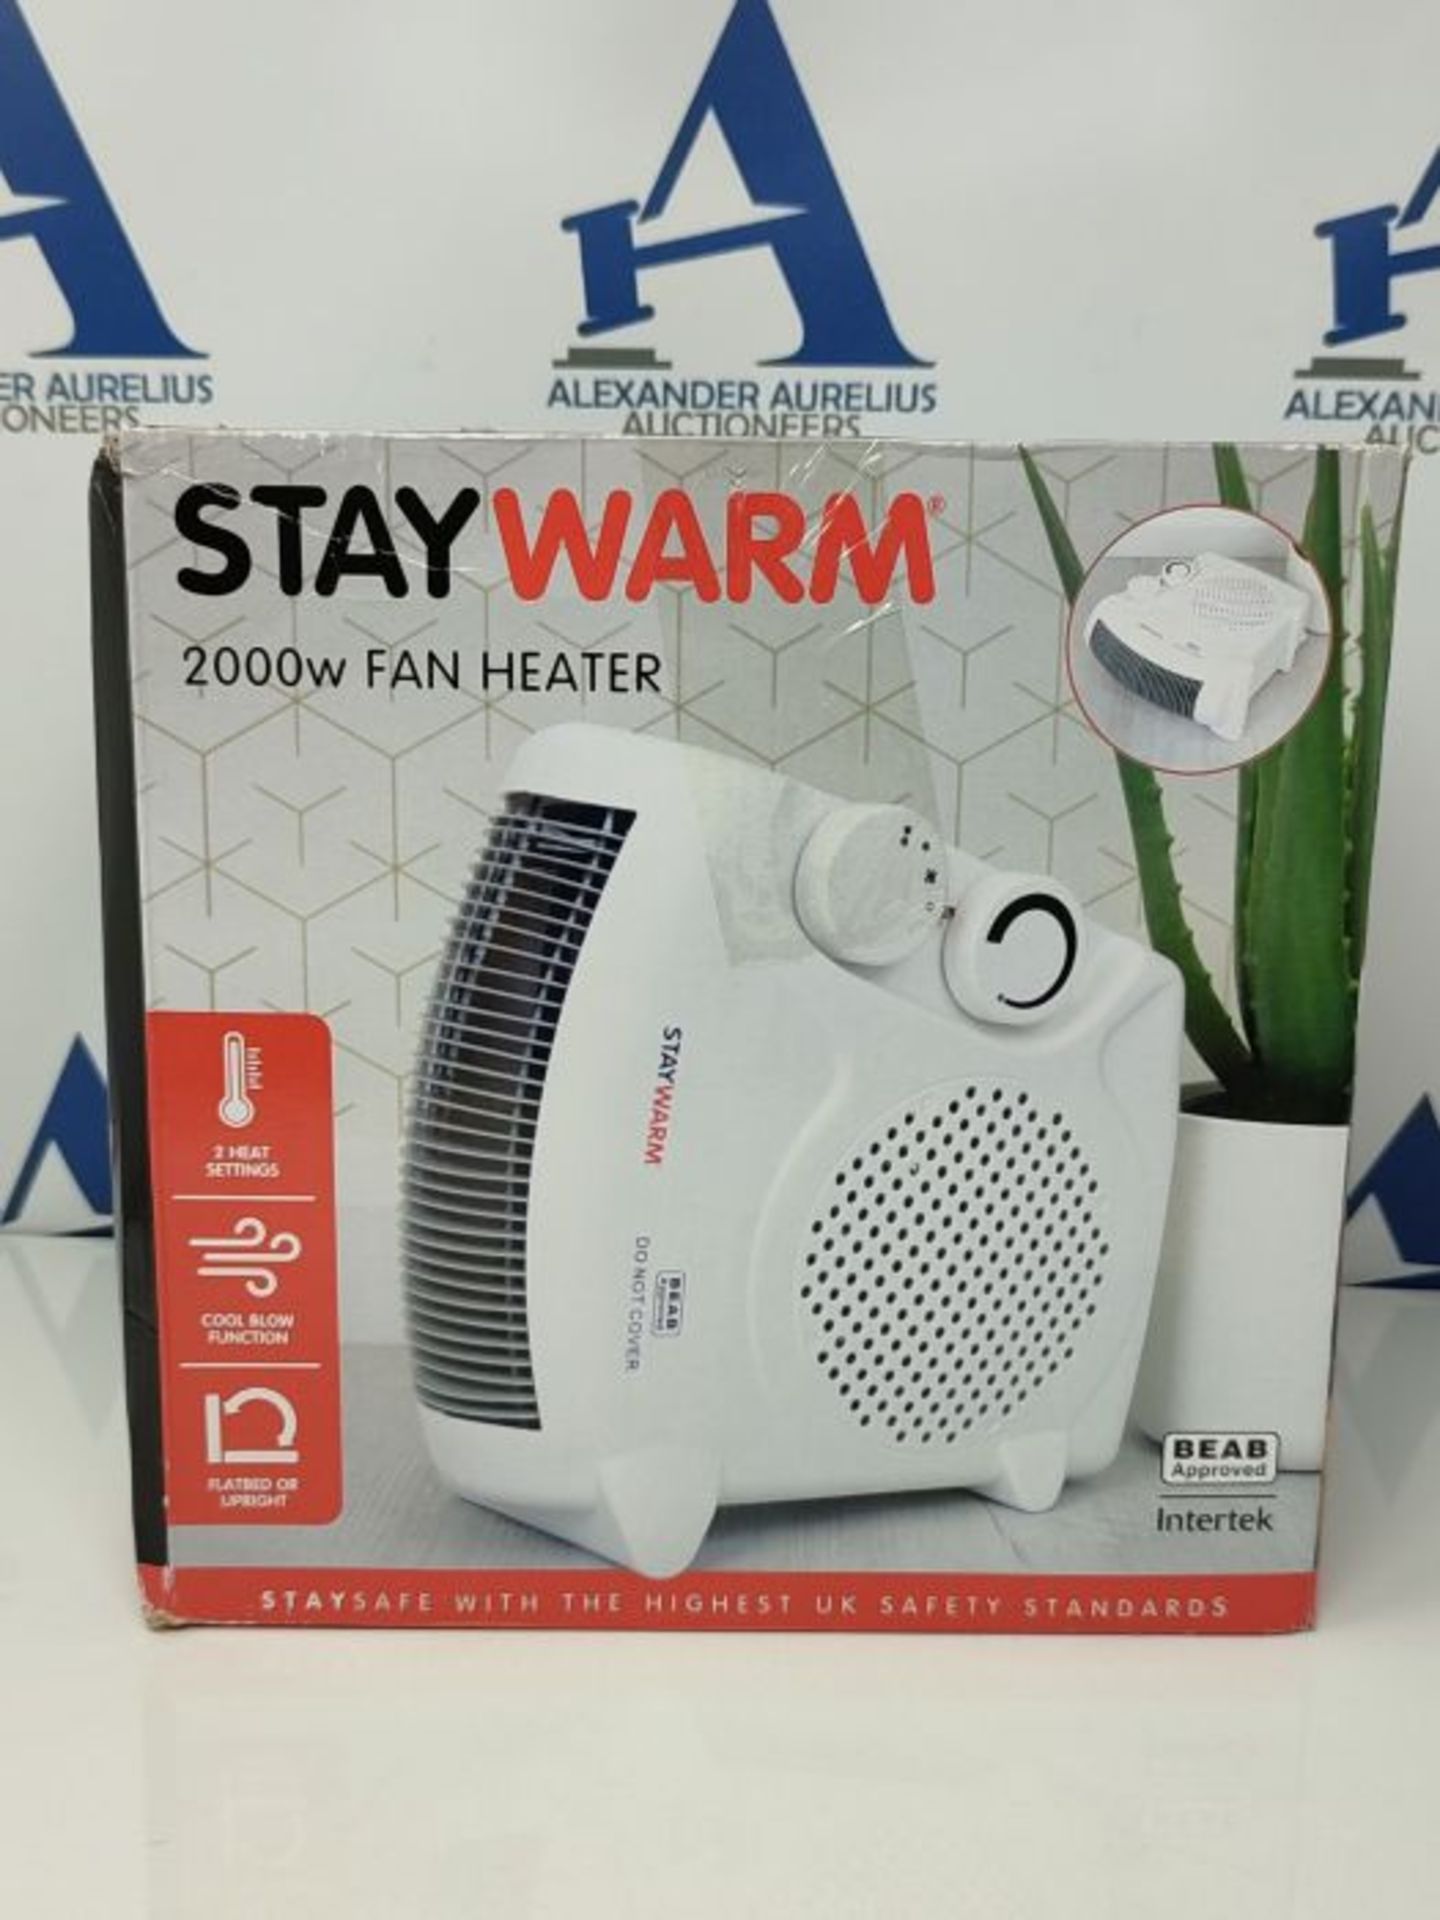 STAYWARM?2000w Upright and Flatbed Fan Heater with 2 Heat Settings / Cool Blow Fan / - Image 2 of 3